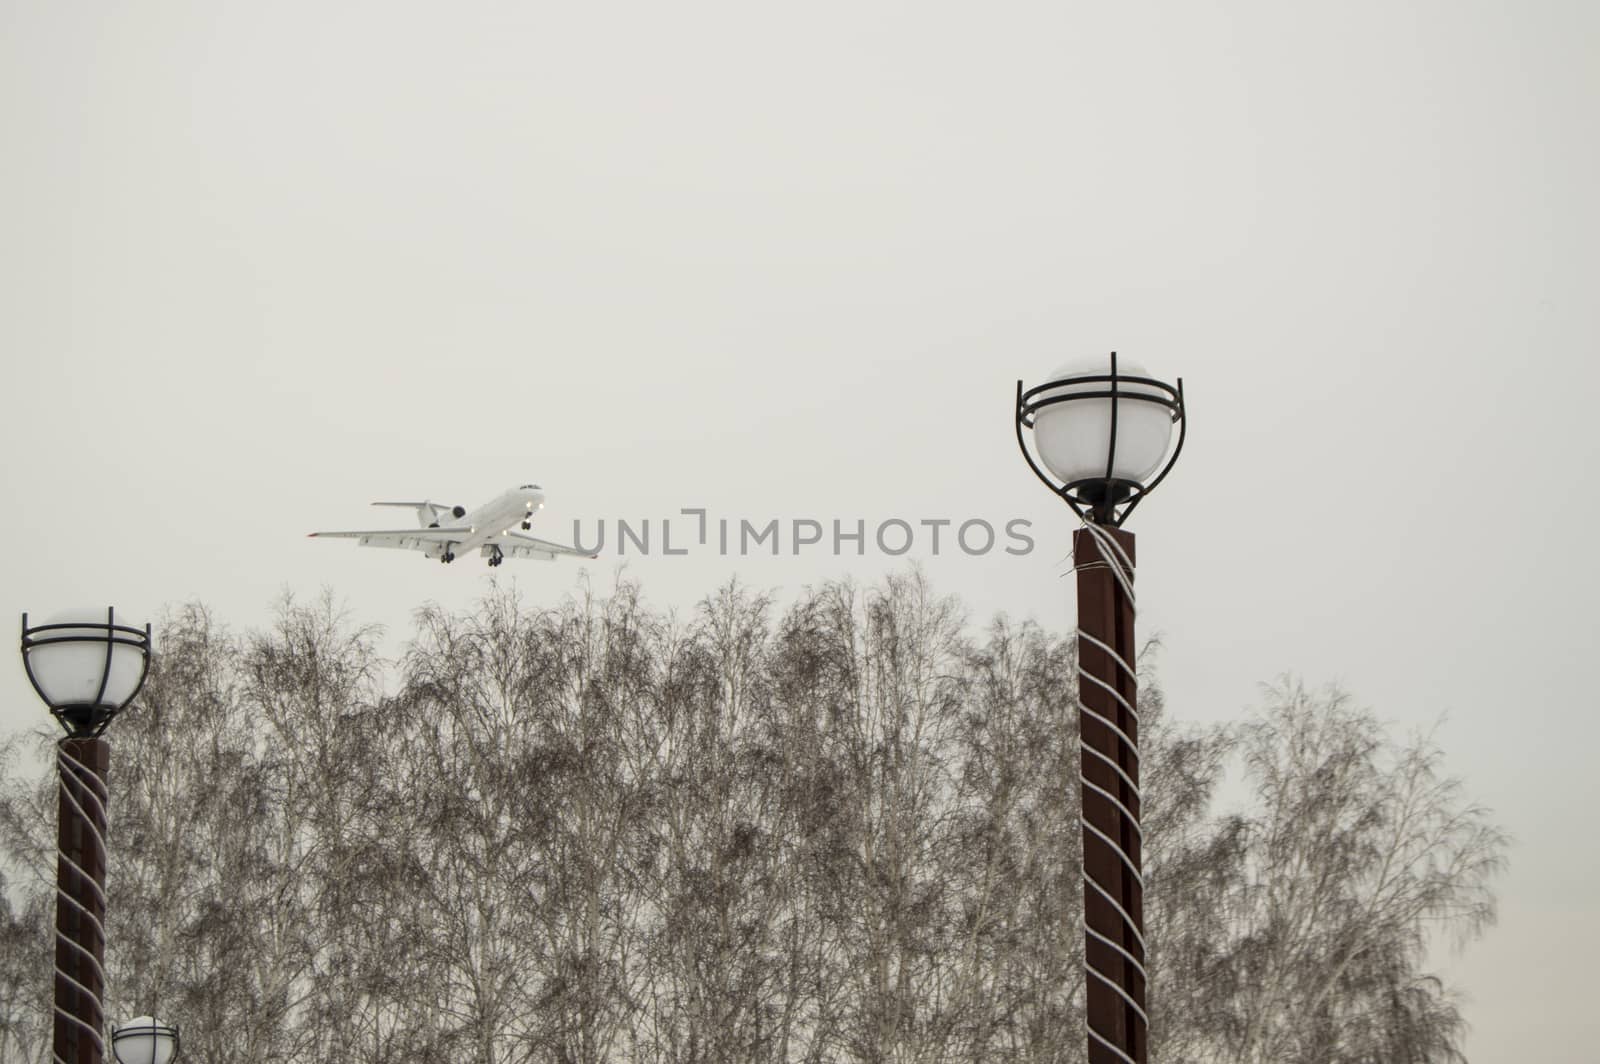 The plane flies low over the city Park and trees, cloudy winter sky. Copy space business travel adventure concept.